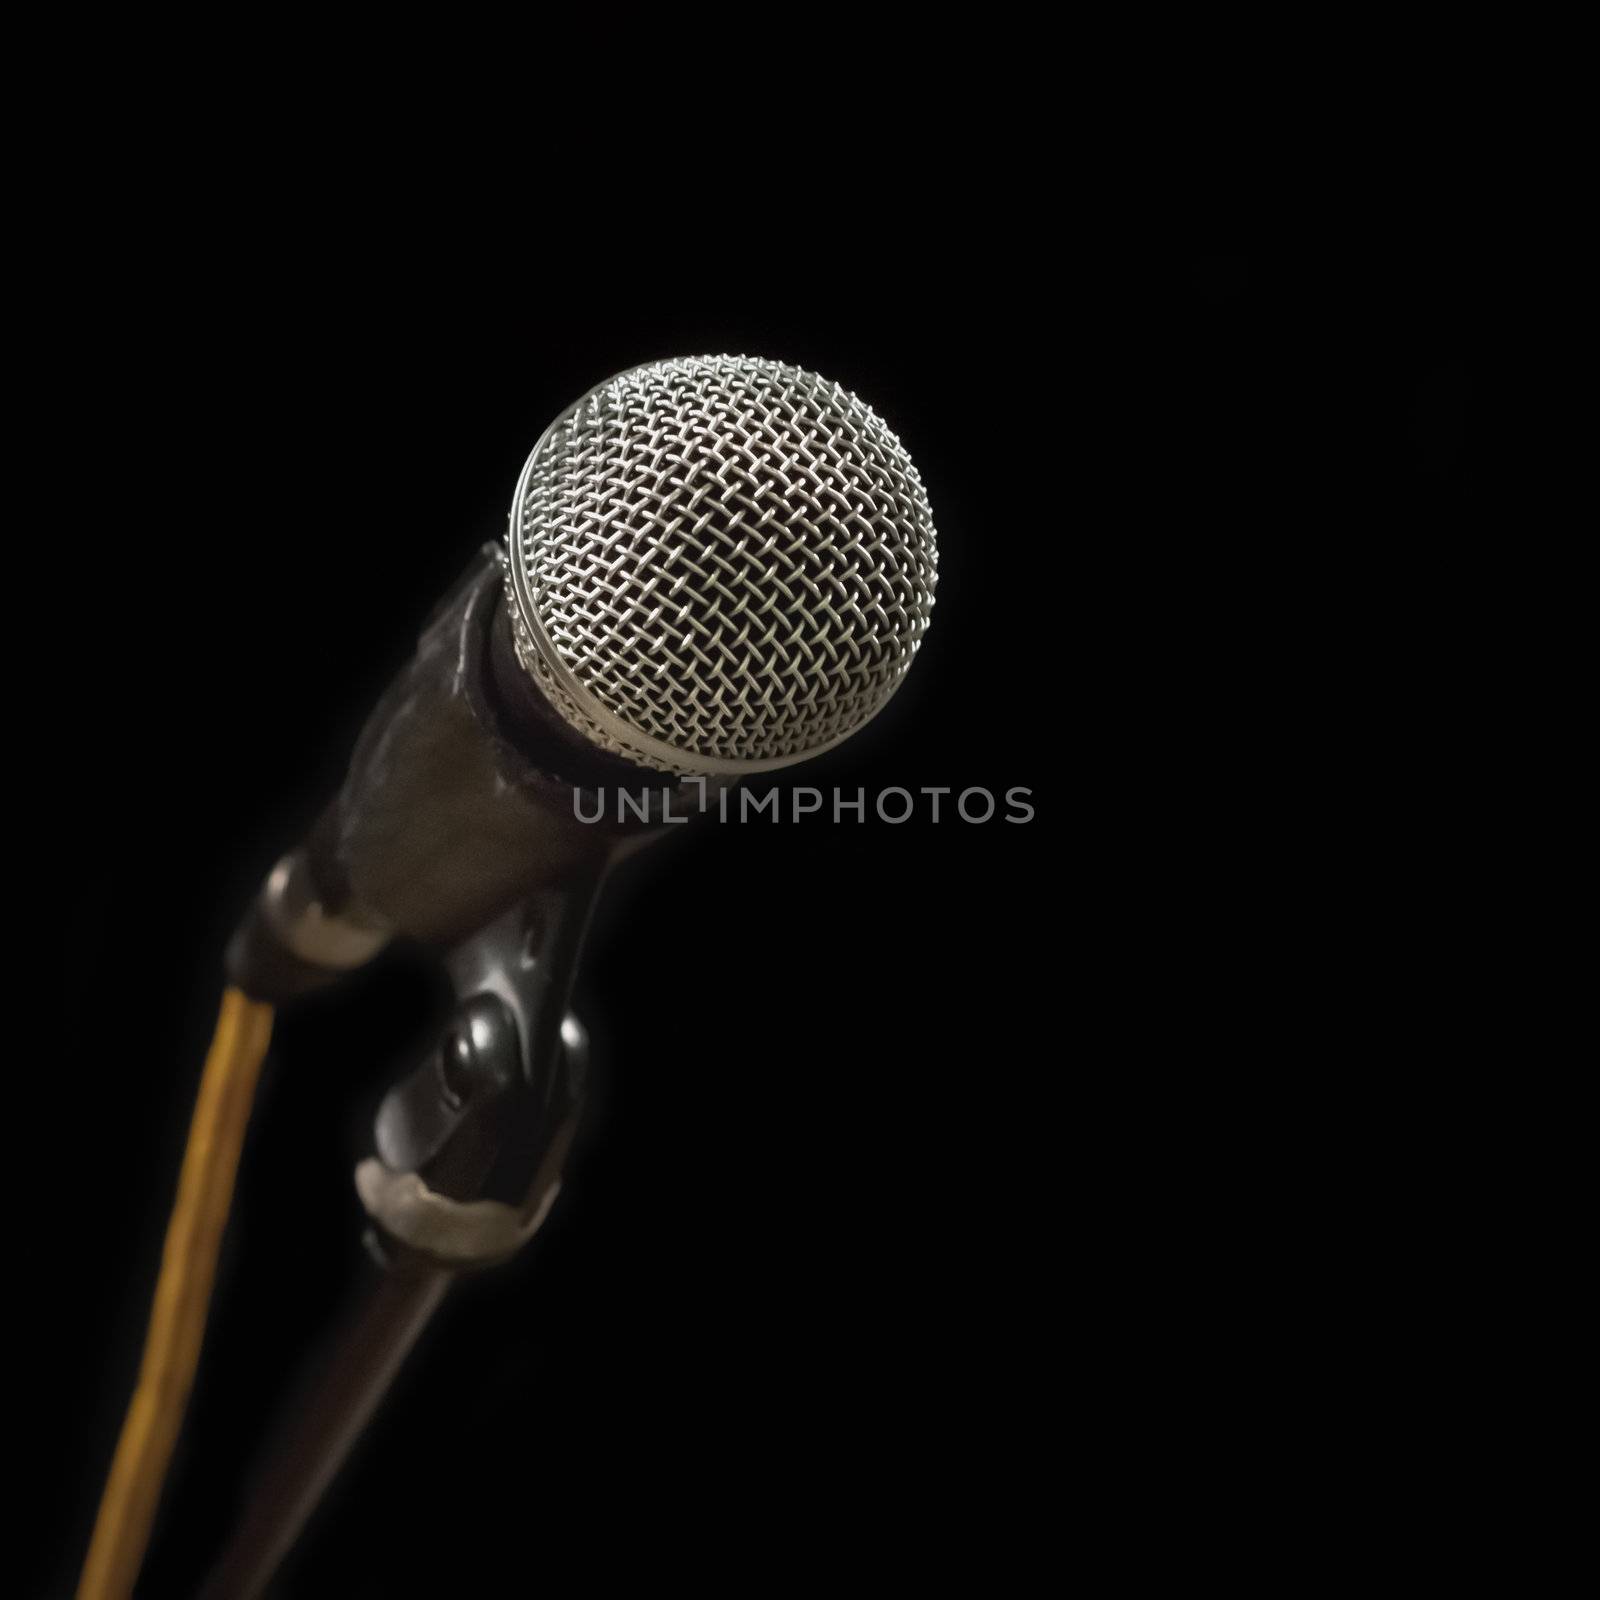 Classic black microphone on black stand. Isolated black background